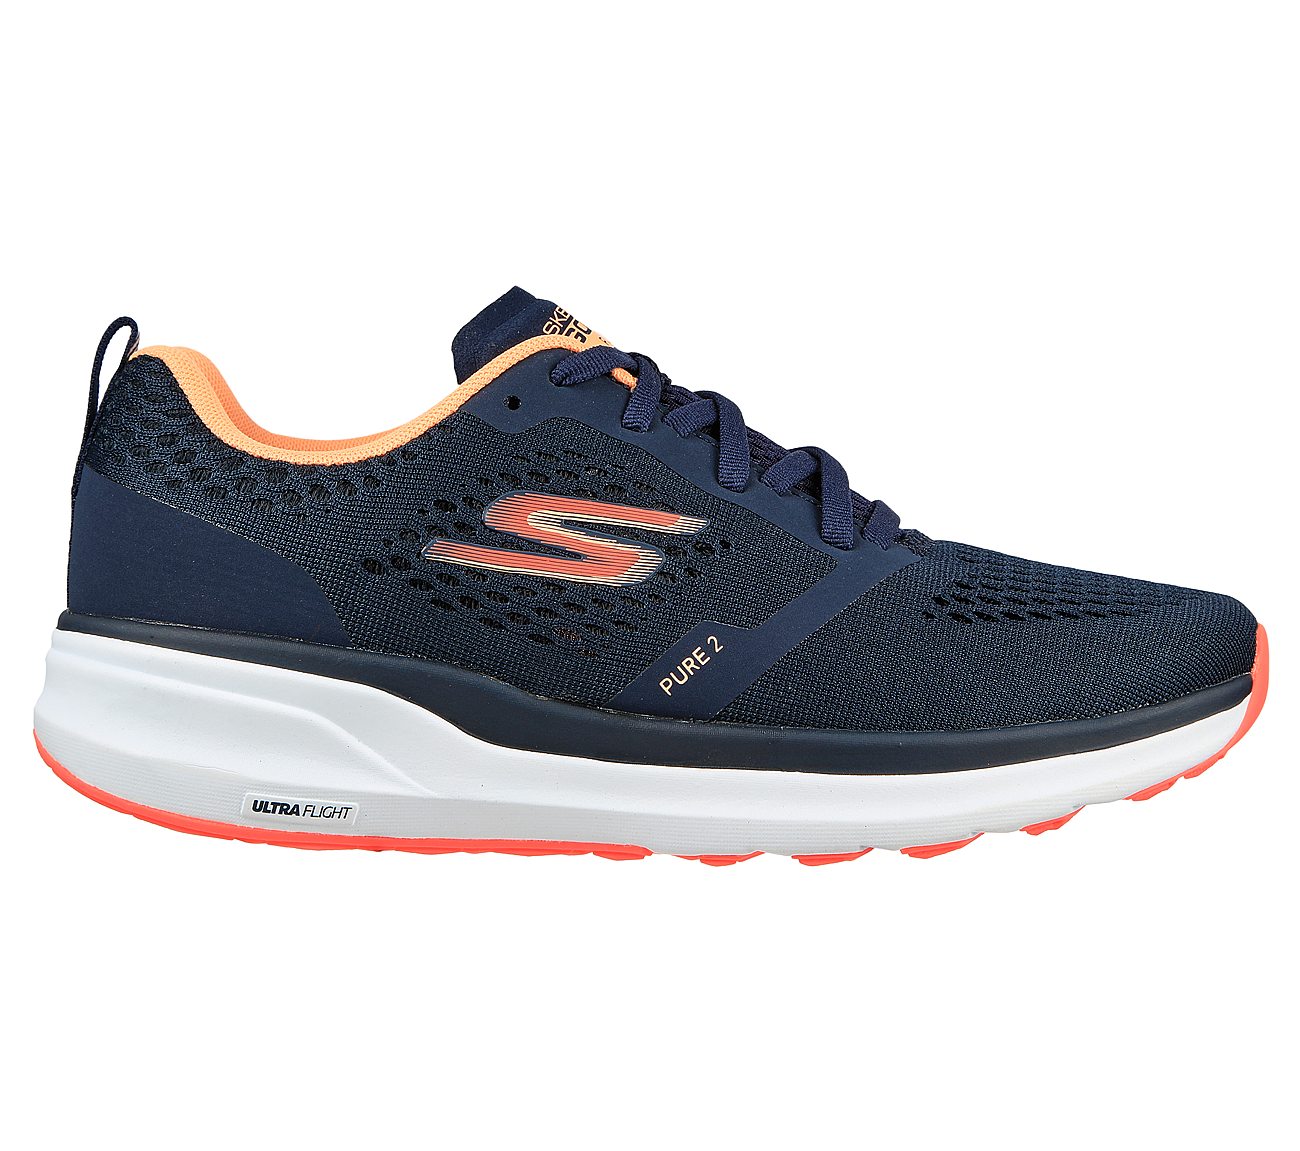 PURE 2, NAVY/ORANGE Footwear Lateral View